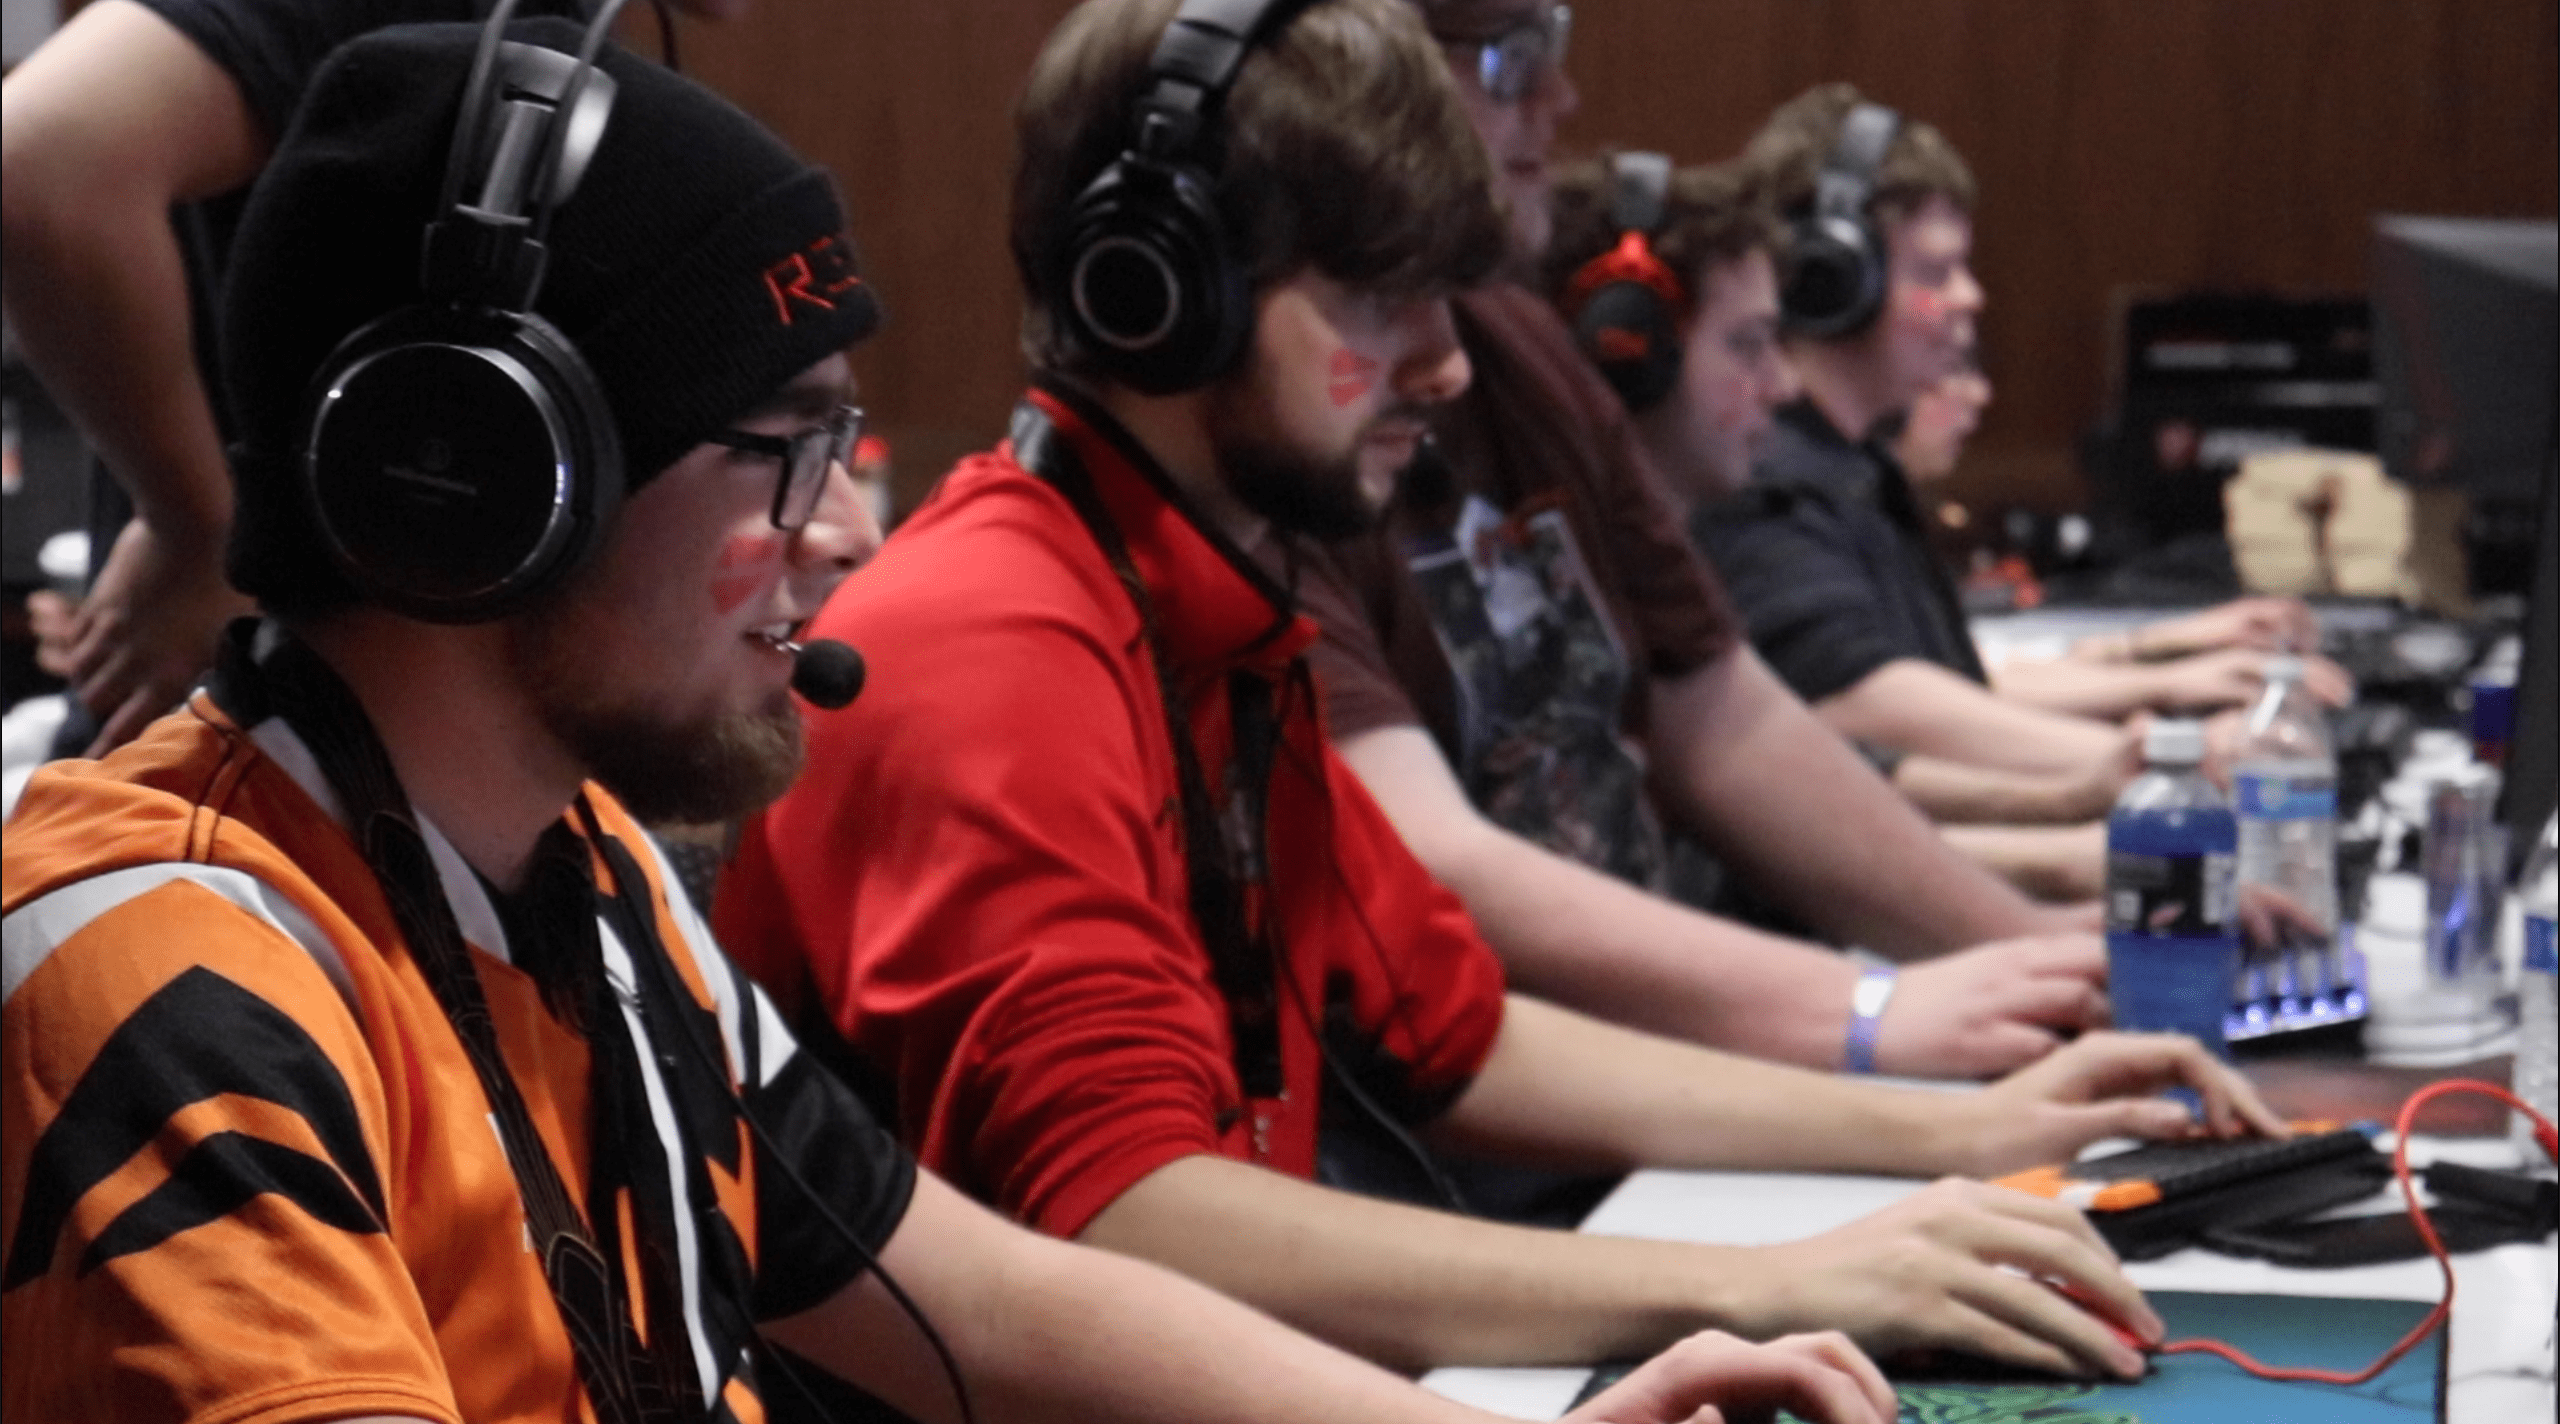 Esports Online competition continues in light of COVID-19